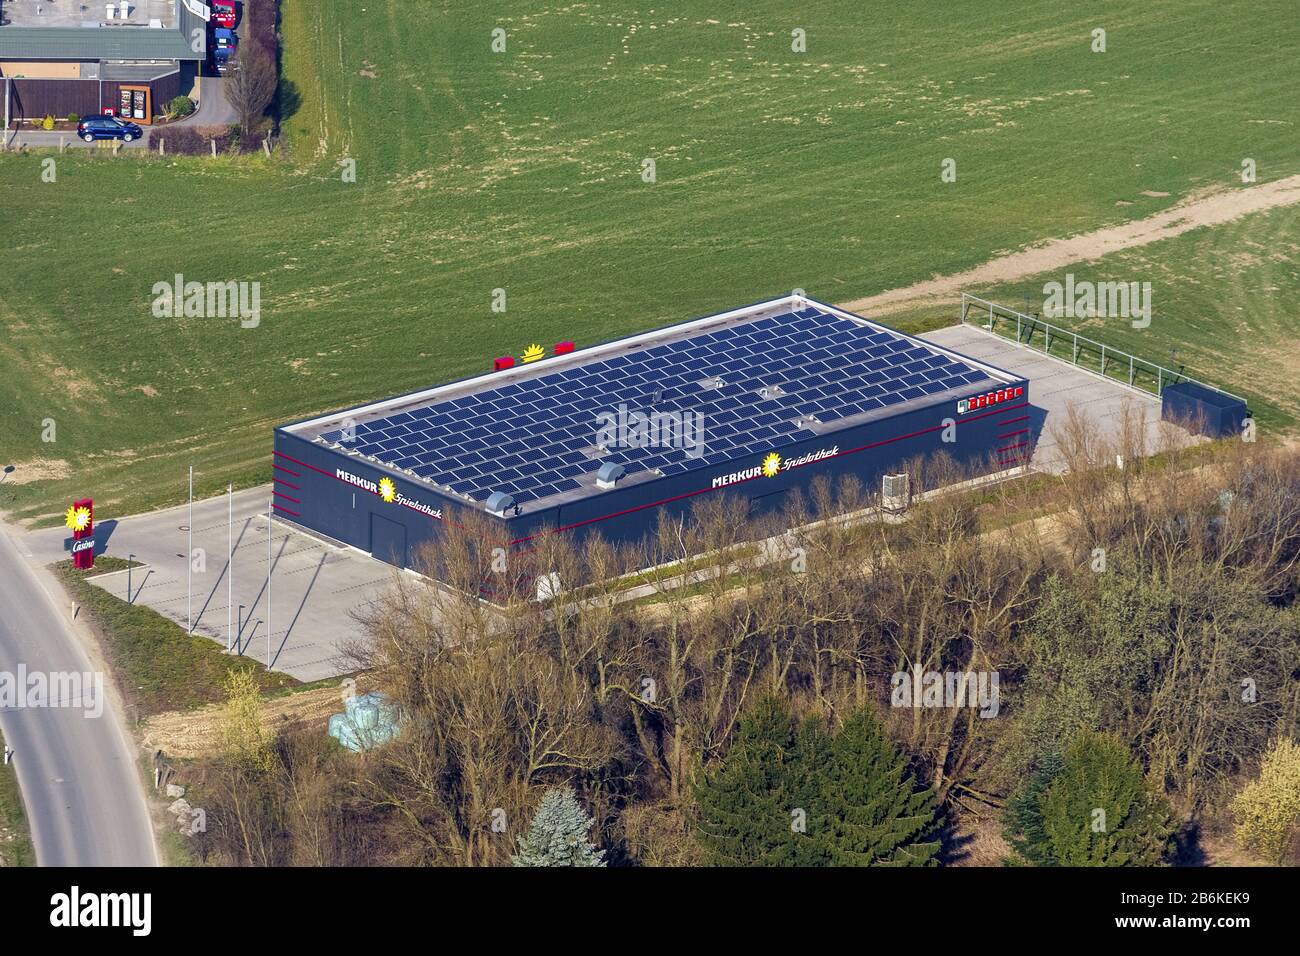 Casino Merkur gambling hall with solar panels or photovoltaic modules on the roof, at the street Haemmerstrasse in Menden, aerial view, Germany, North Rhine-Westphalia, Sauerland, Menden Stock Photo